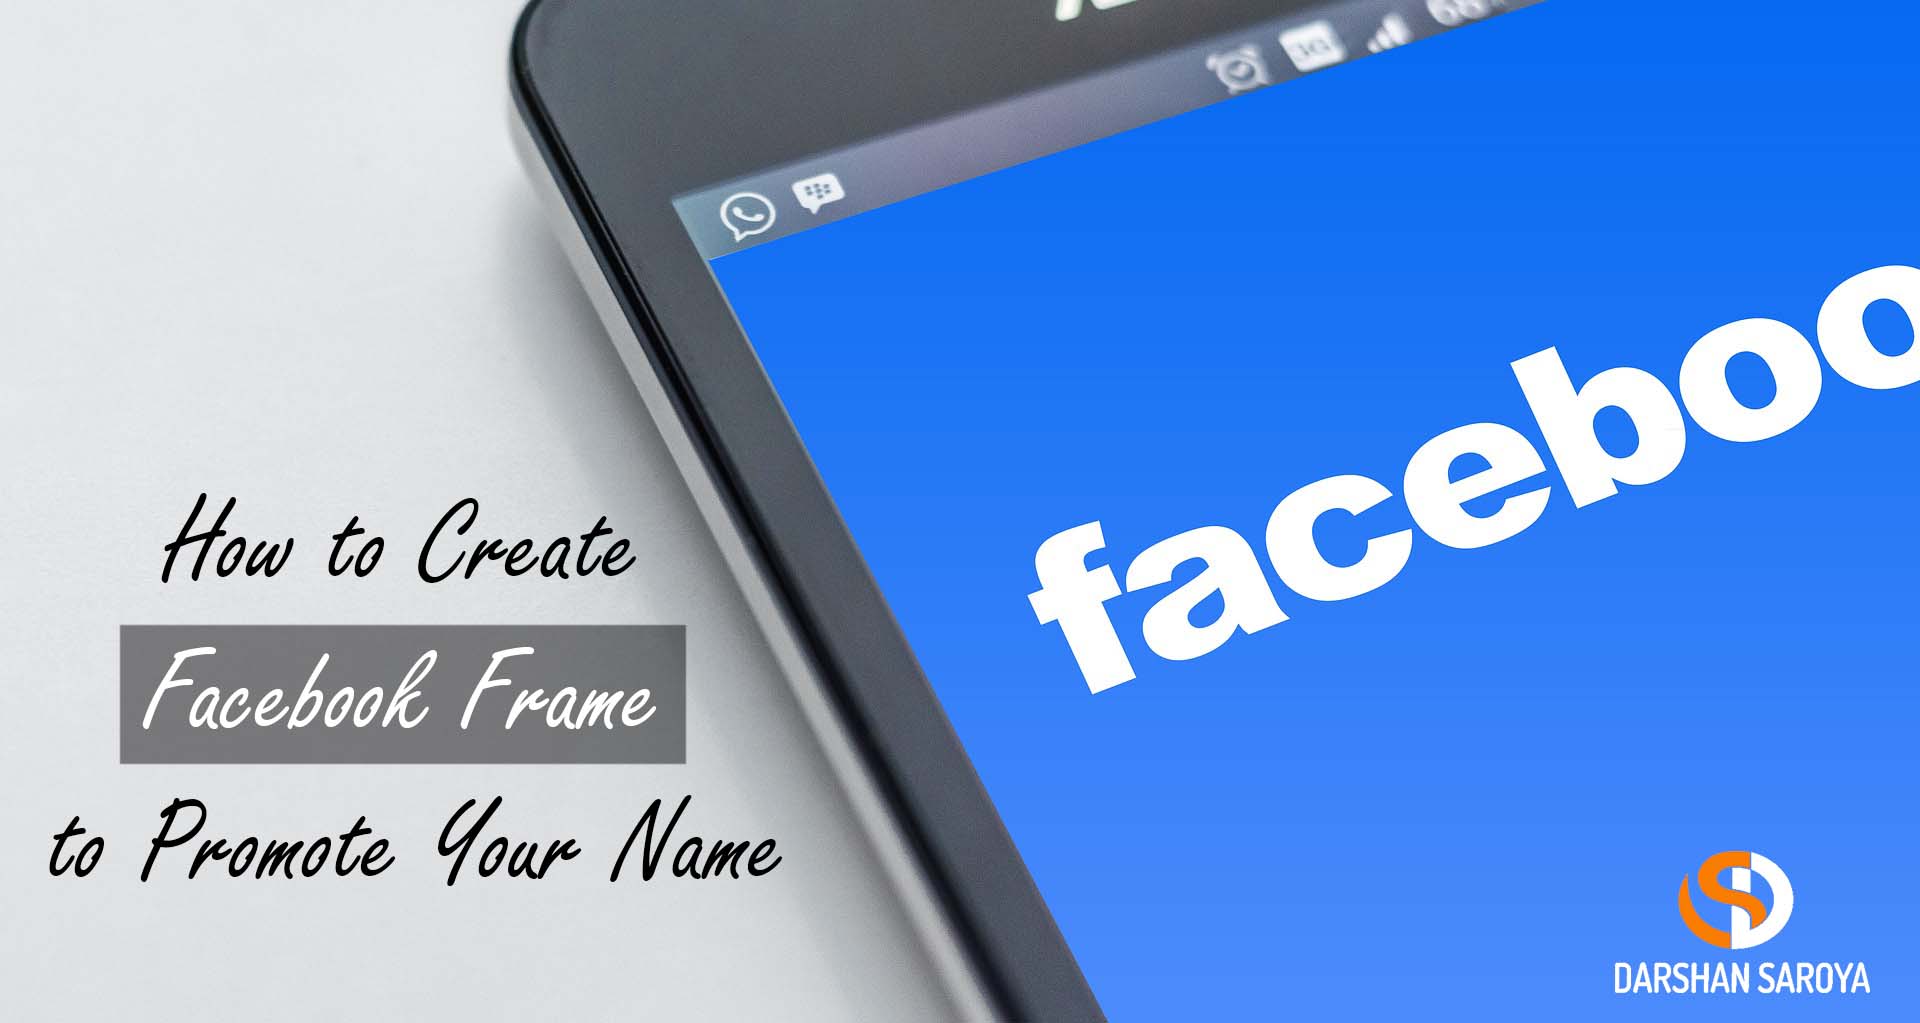 How to Create Facebook Frame to Promote Your Name